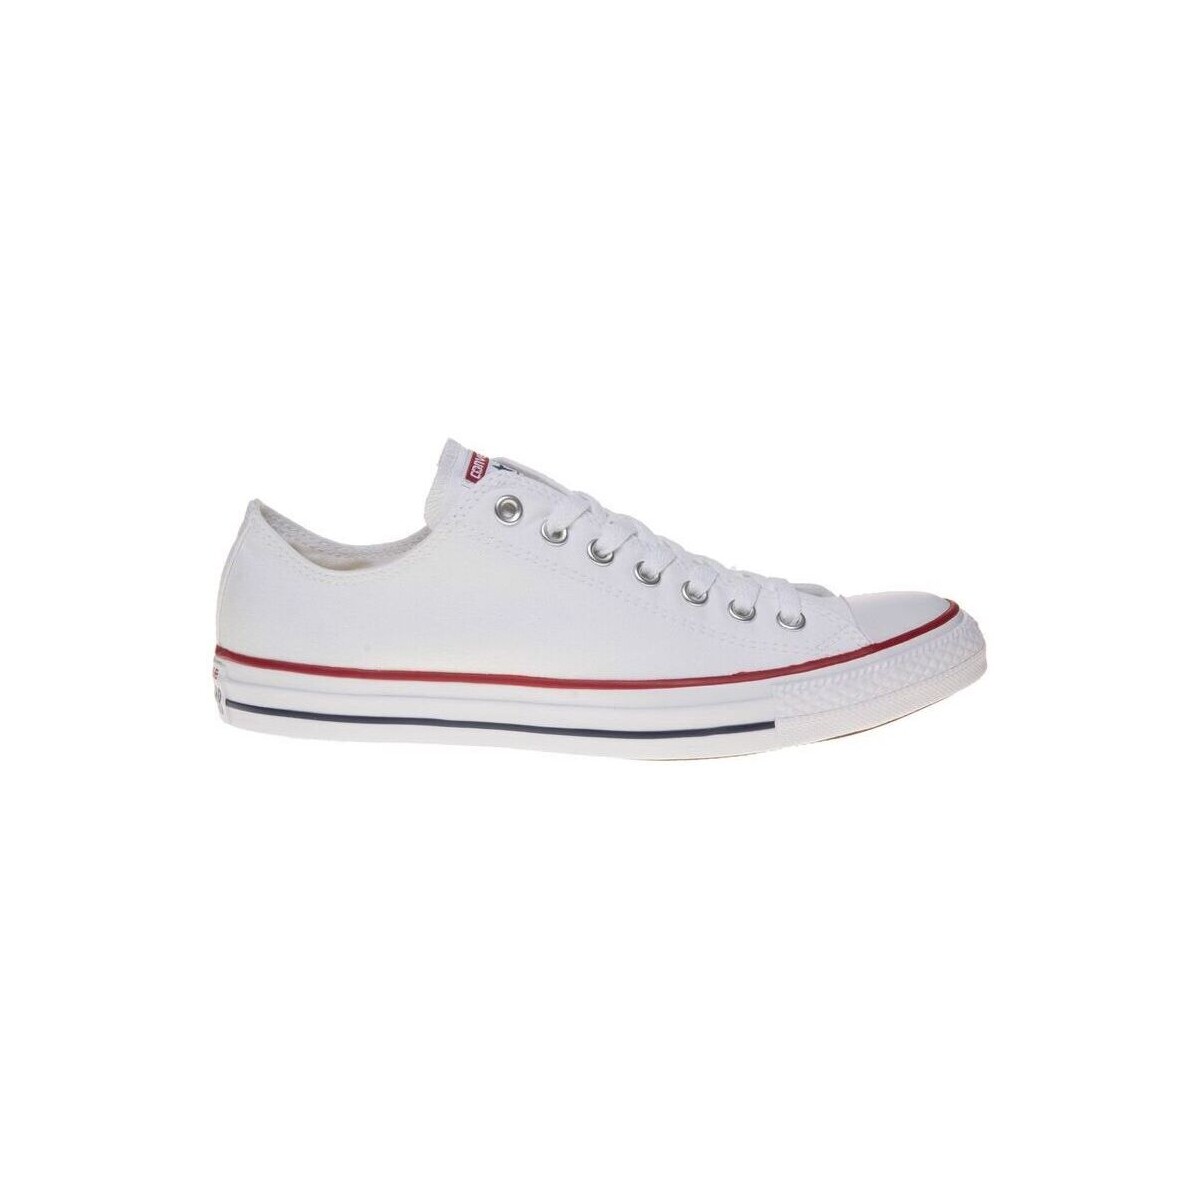 Chaussures Homme Baskets basses Converse All Star Ox Tennis Blanc